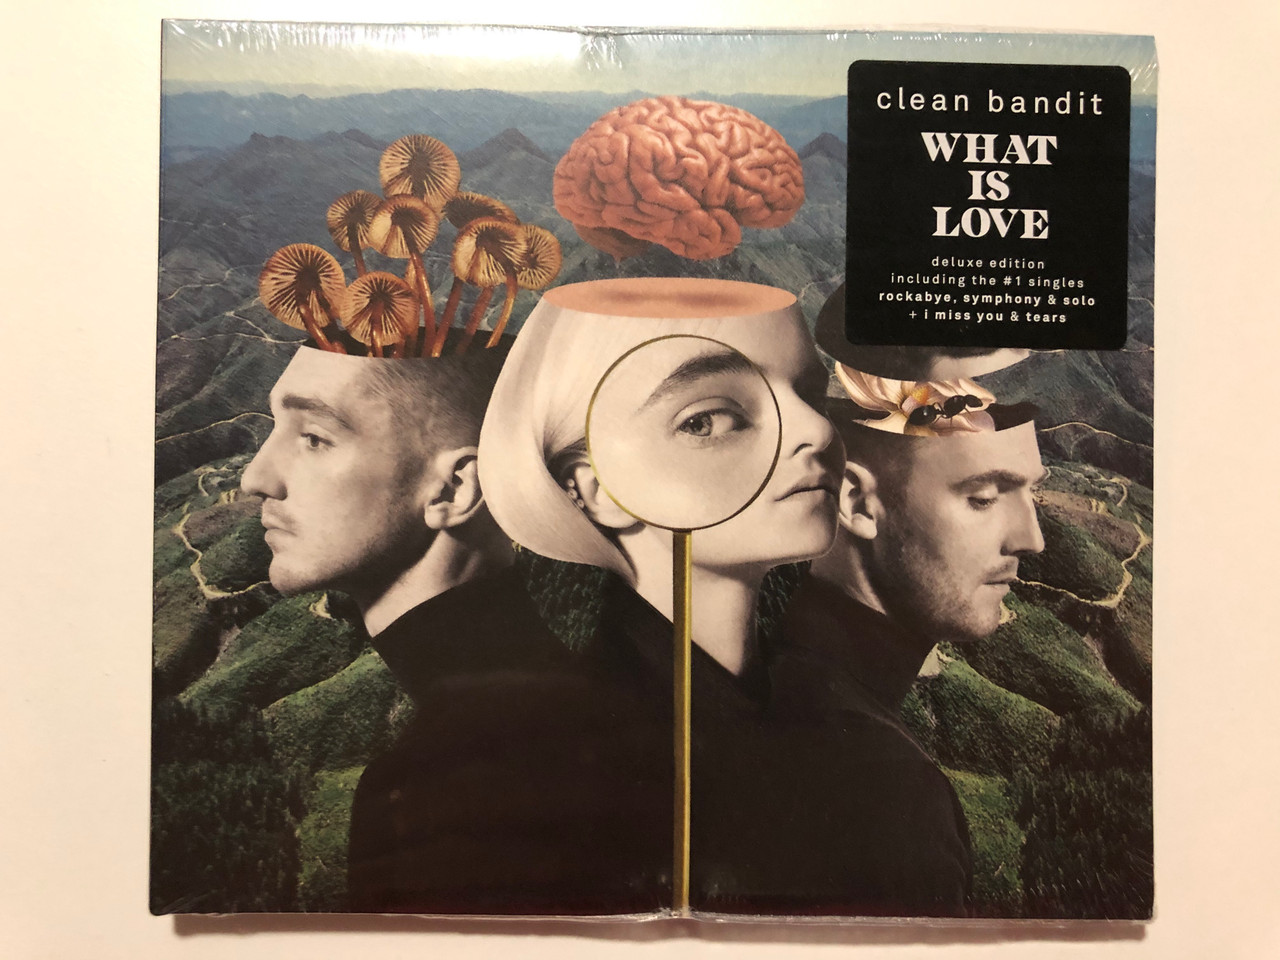 https://cdn10.bigcommerce.com/s-62bdpkt7pb/products/29783/images/177312/Clean_Bandit_What_Is_Love_Deluxe_Edition_Including_the_1_singles_rockabye_symphony_solo_i_miss_you_tears_Atlantic_Audio_CD_2018_0190295552572_1__99945.1620118049.1280.1280.JPG?c=2&_ga=2.168064801.1294282105.1620933183-96777119.1620933183